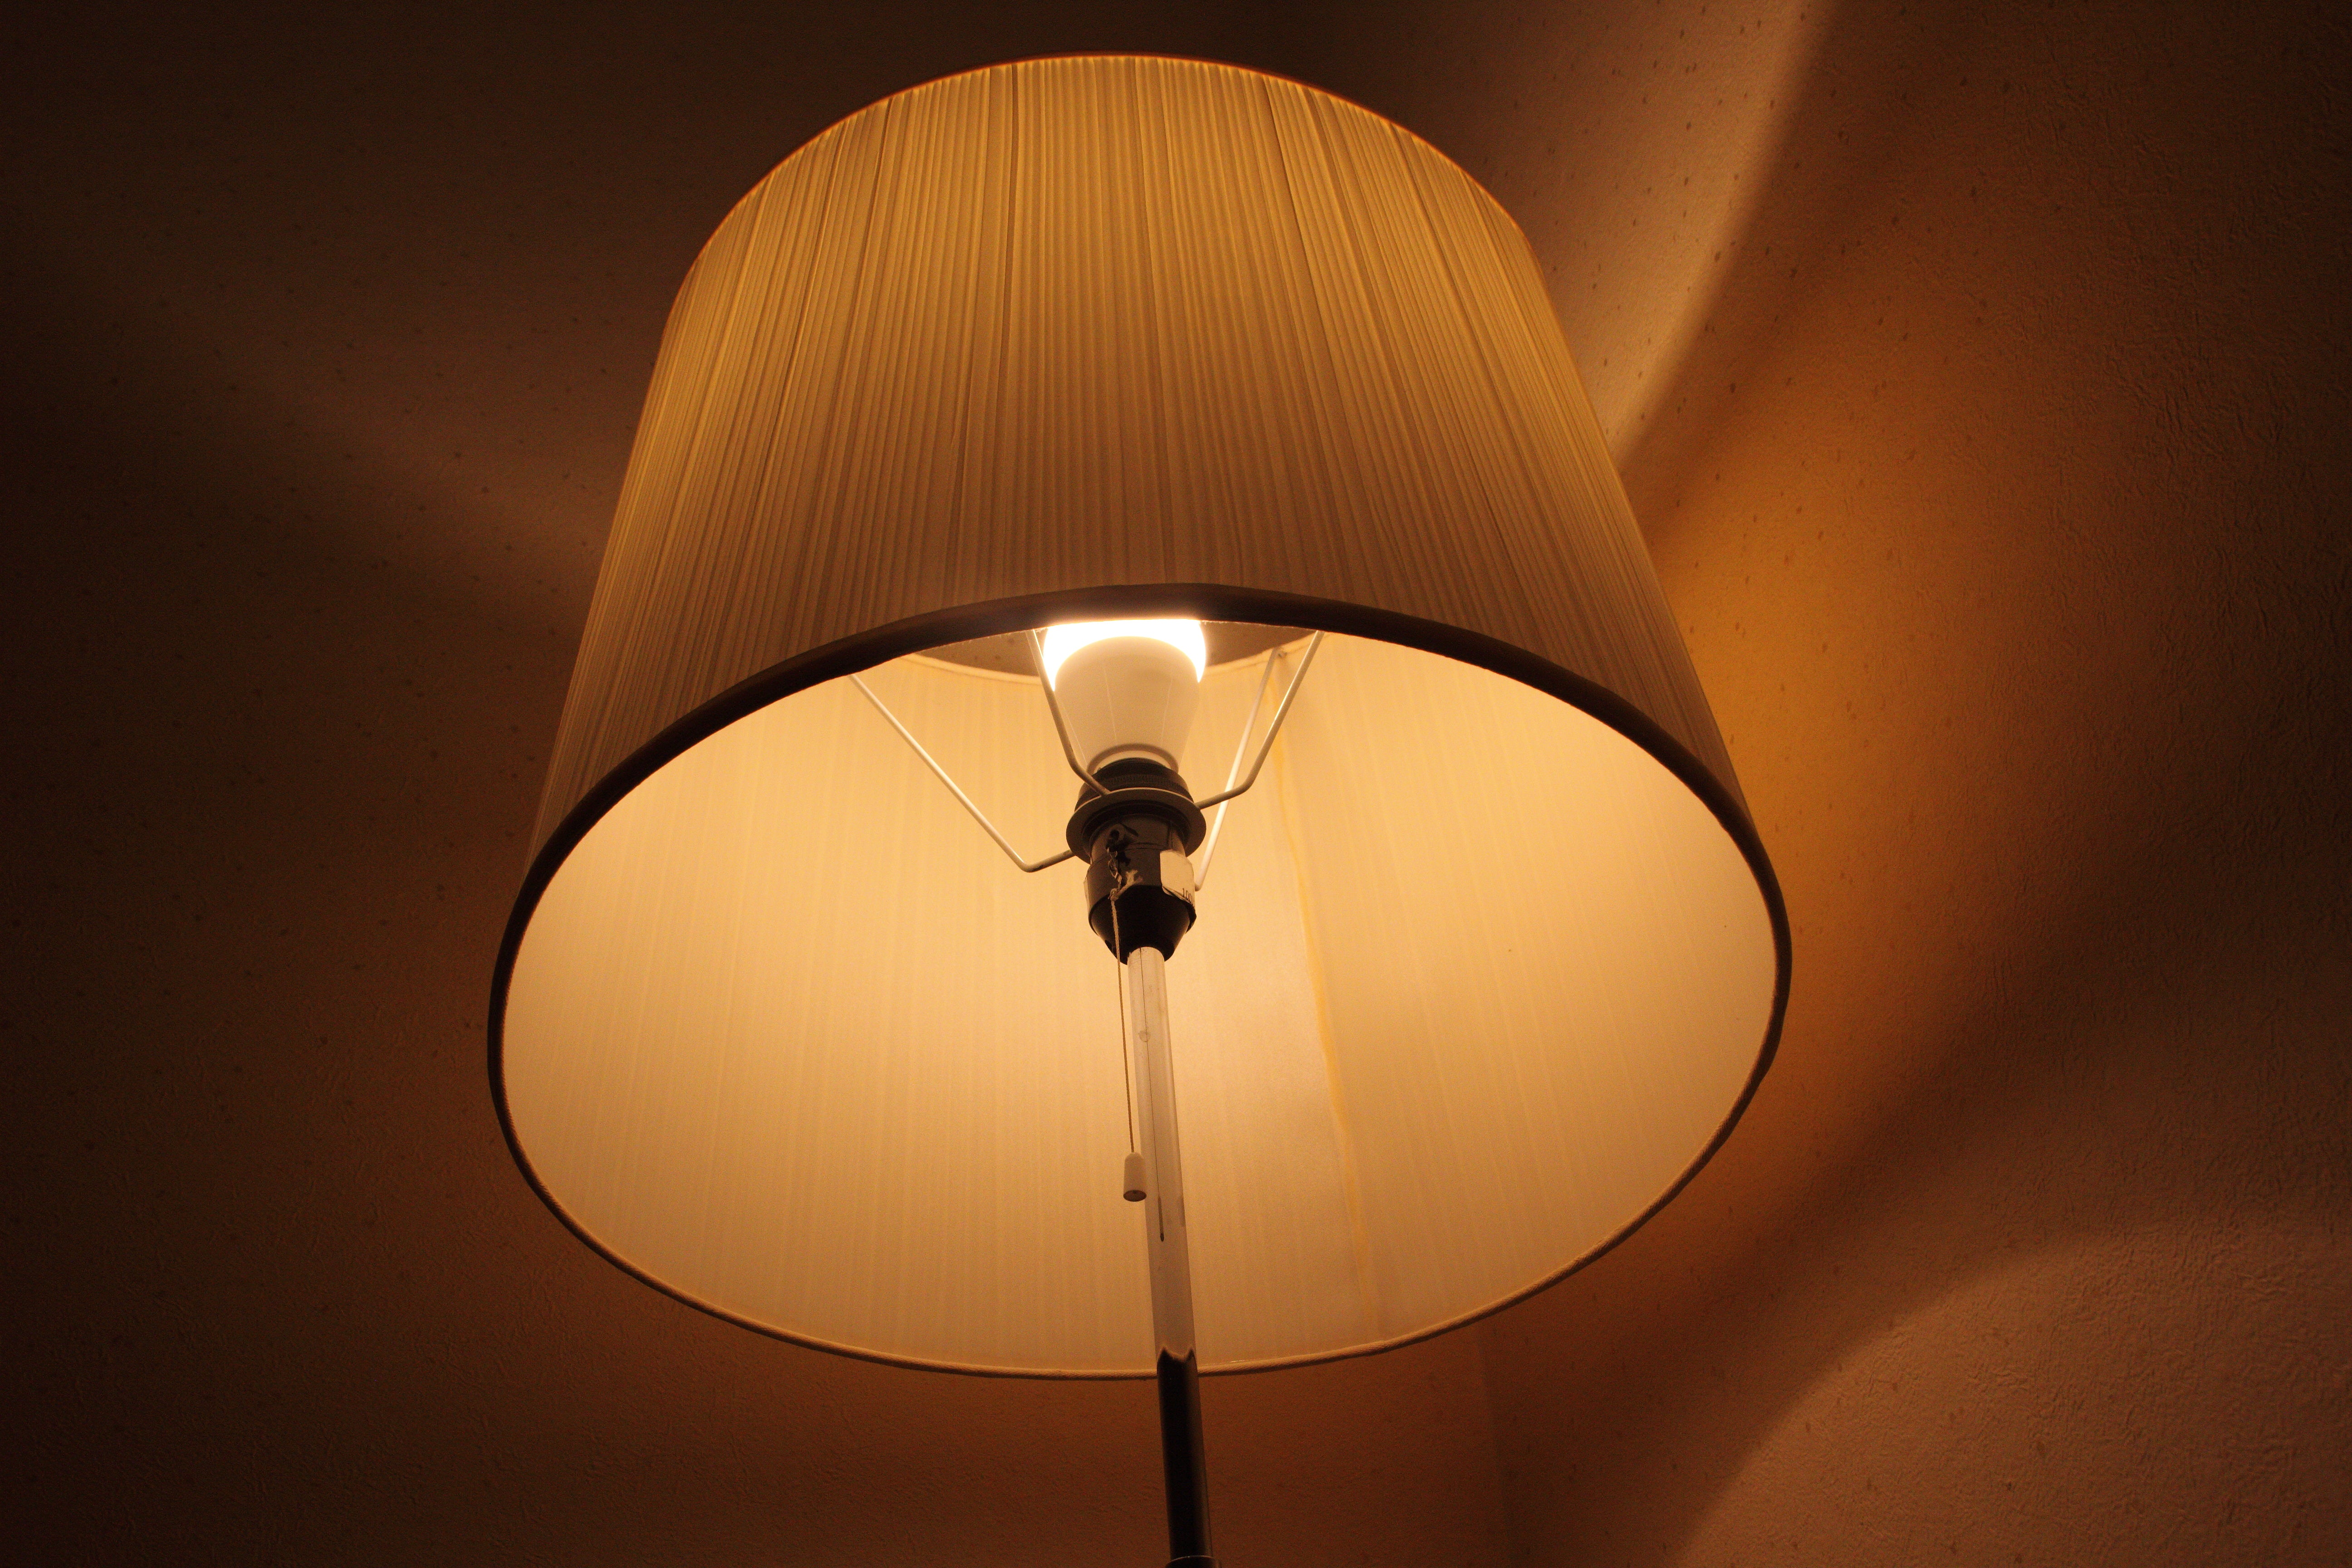 dimmable down to 5%